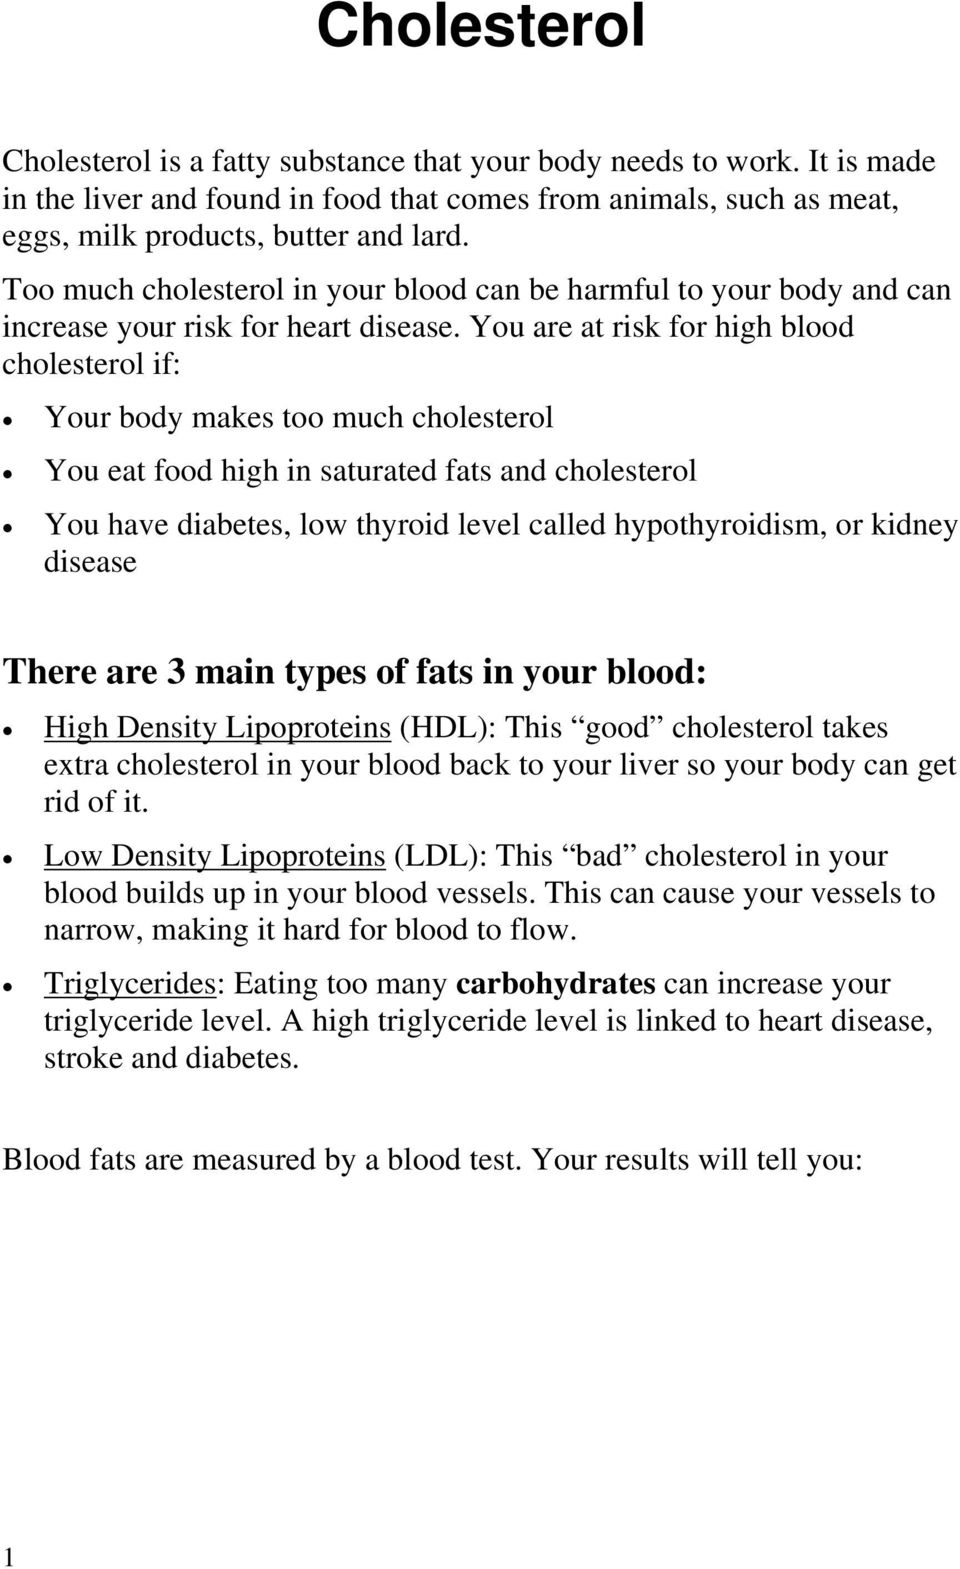 You are at risk for high blood cholesterol if: Your body makes too much cholesterol You eat food high in saturated fats and cholesterol You have diabetes, low thyroid level called hypothyroidism, or